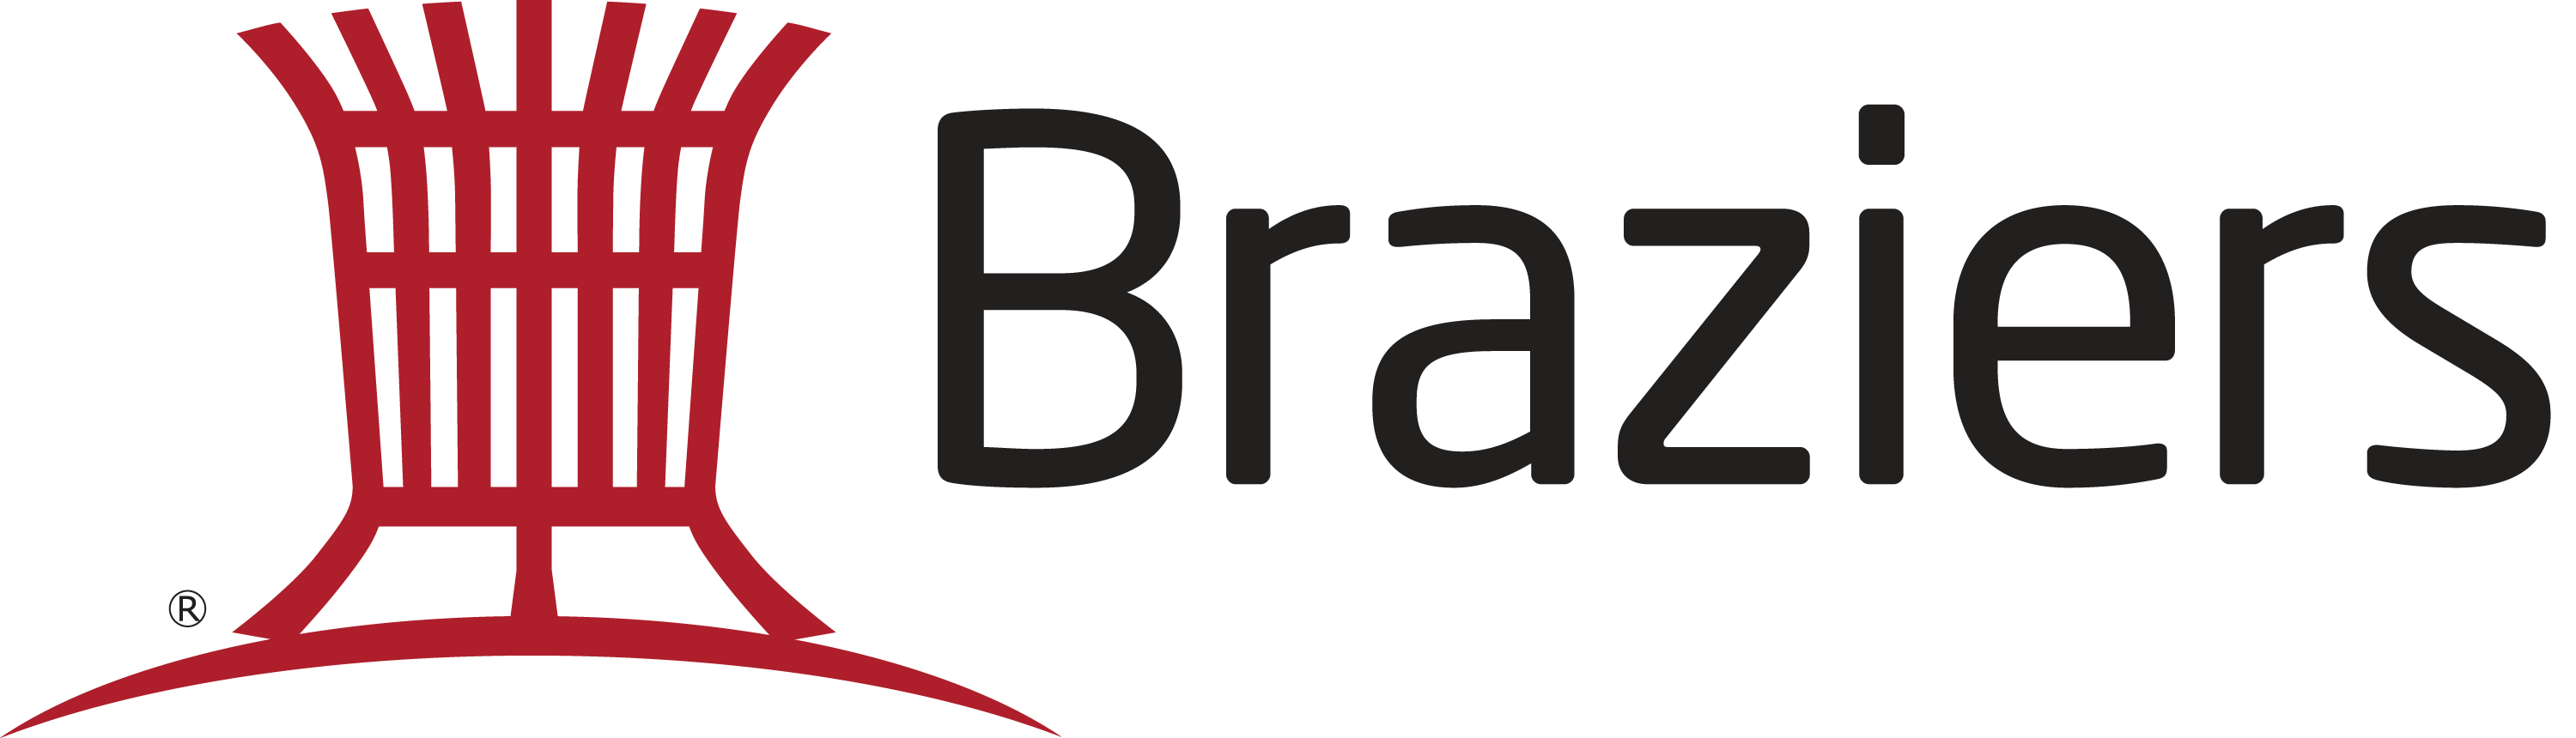 Braziers-logo.png